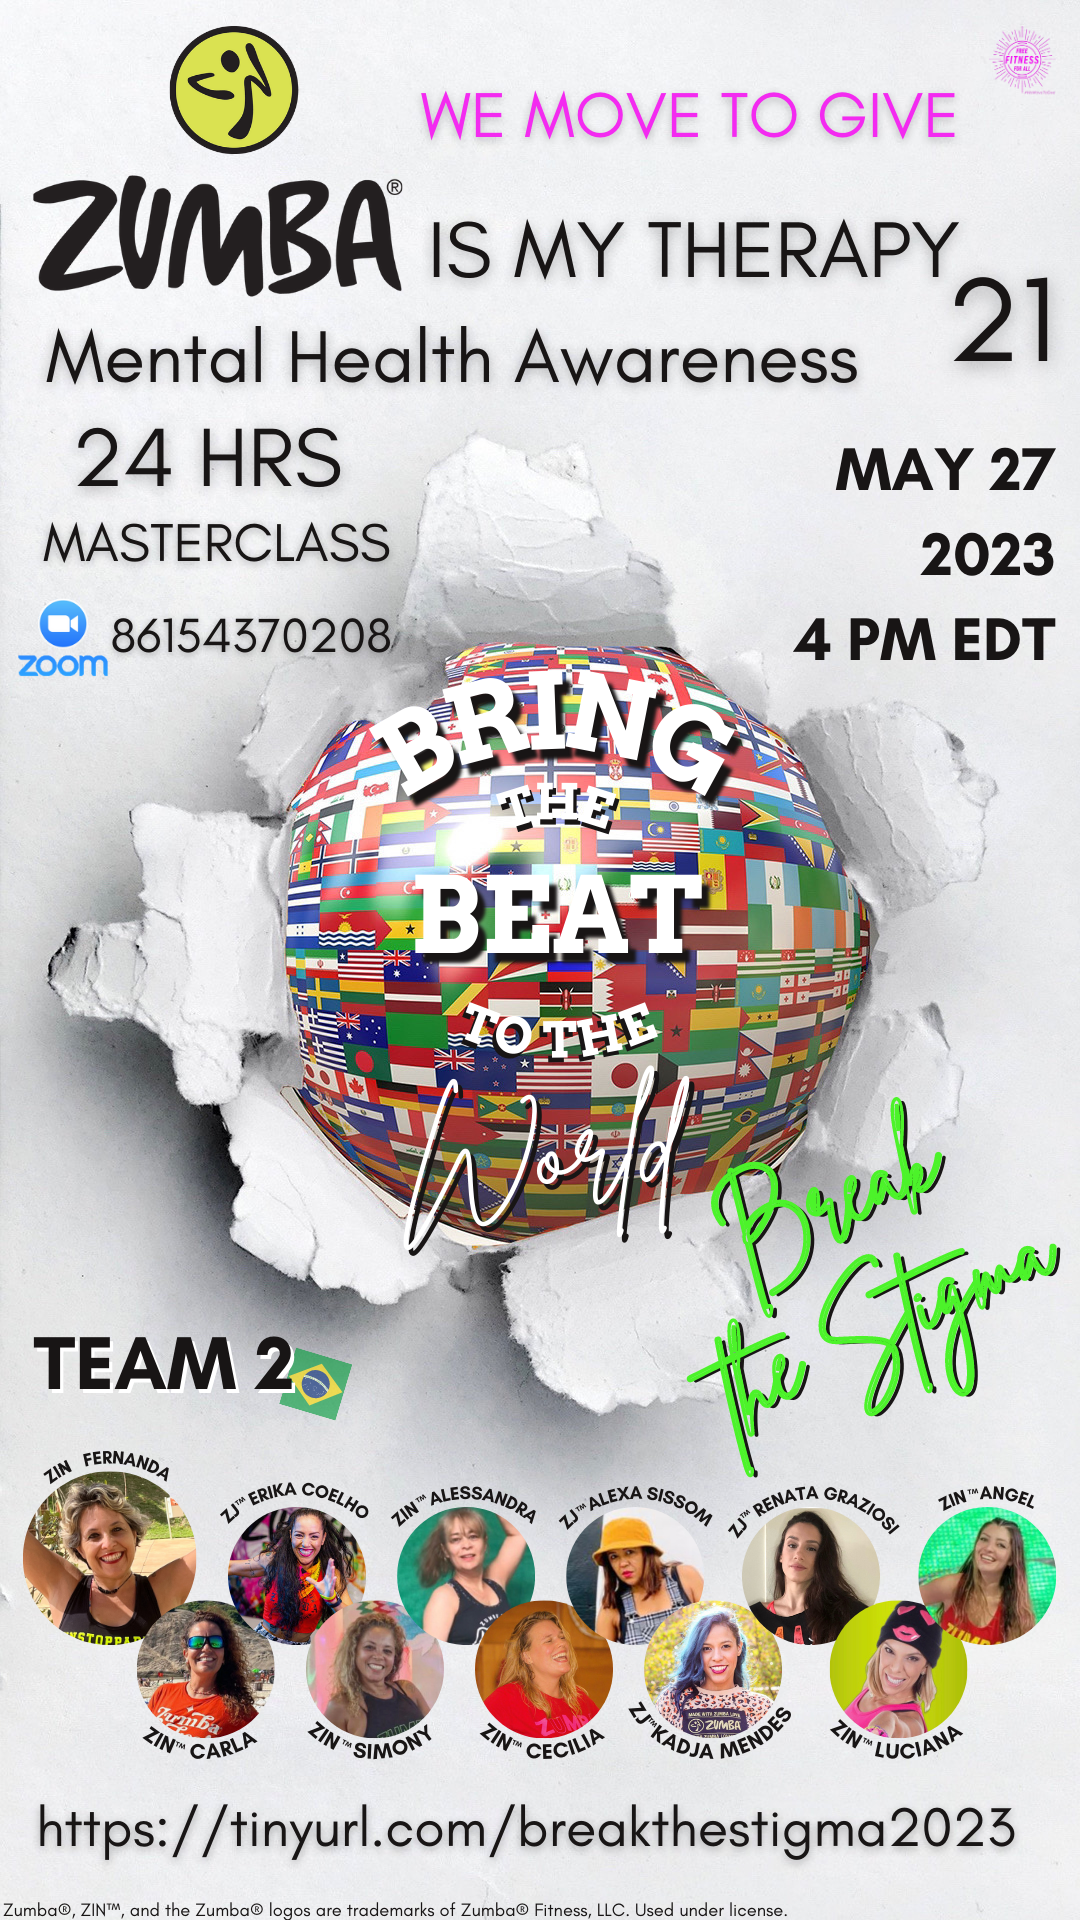 Team 2 - May 27th 4 PM EDT